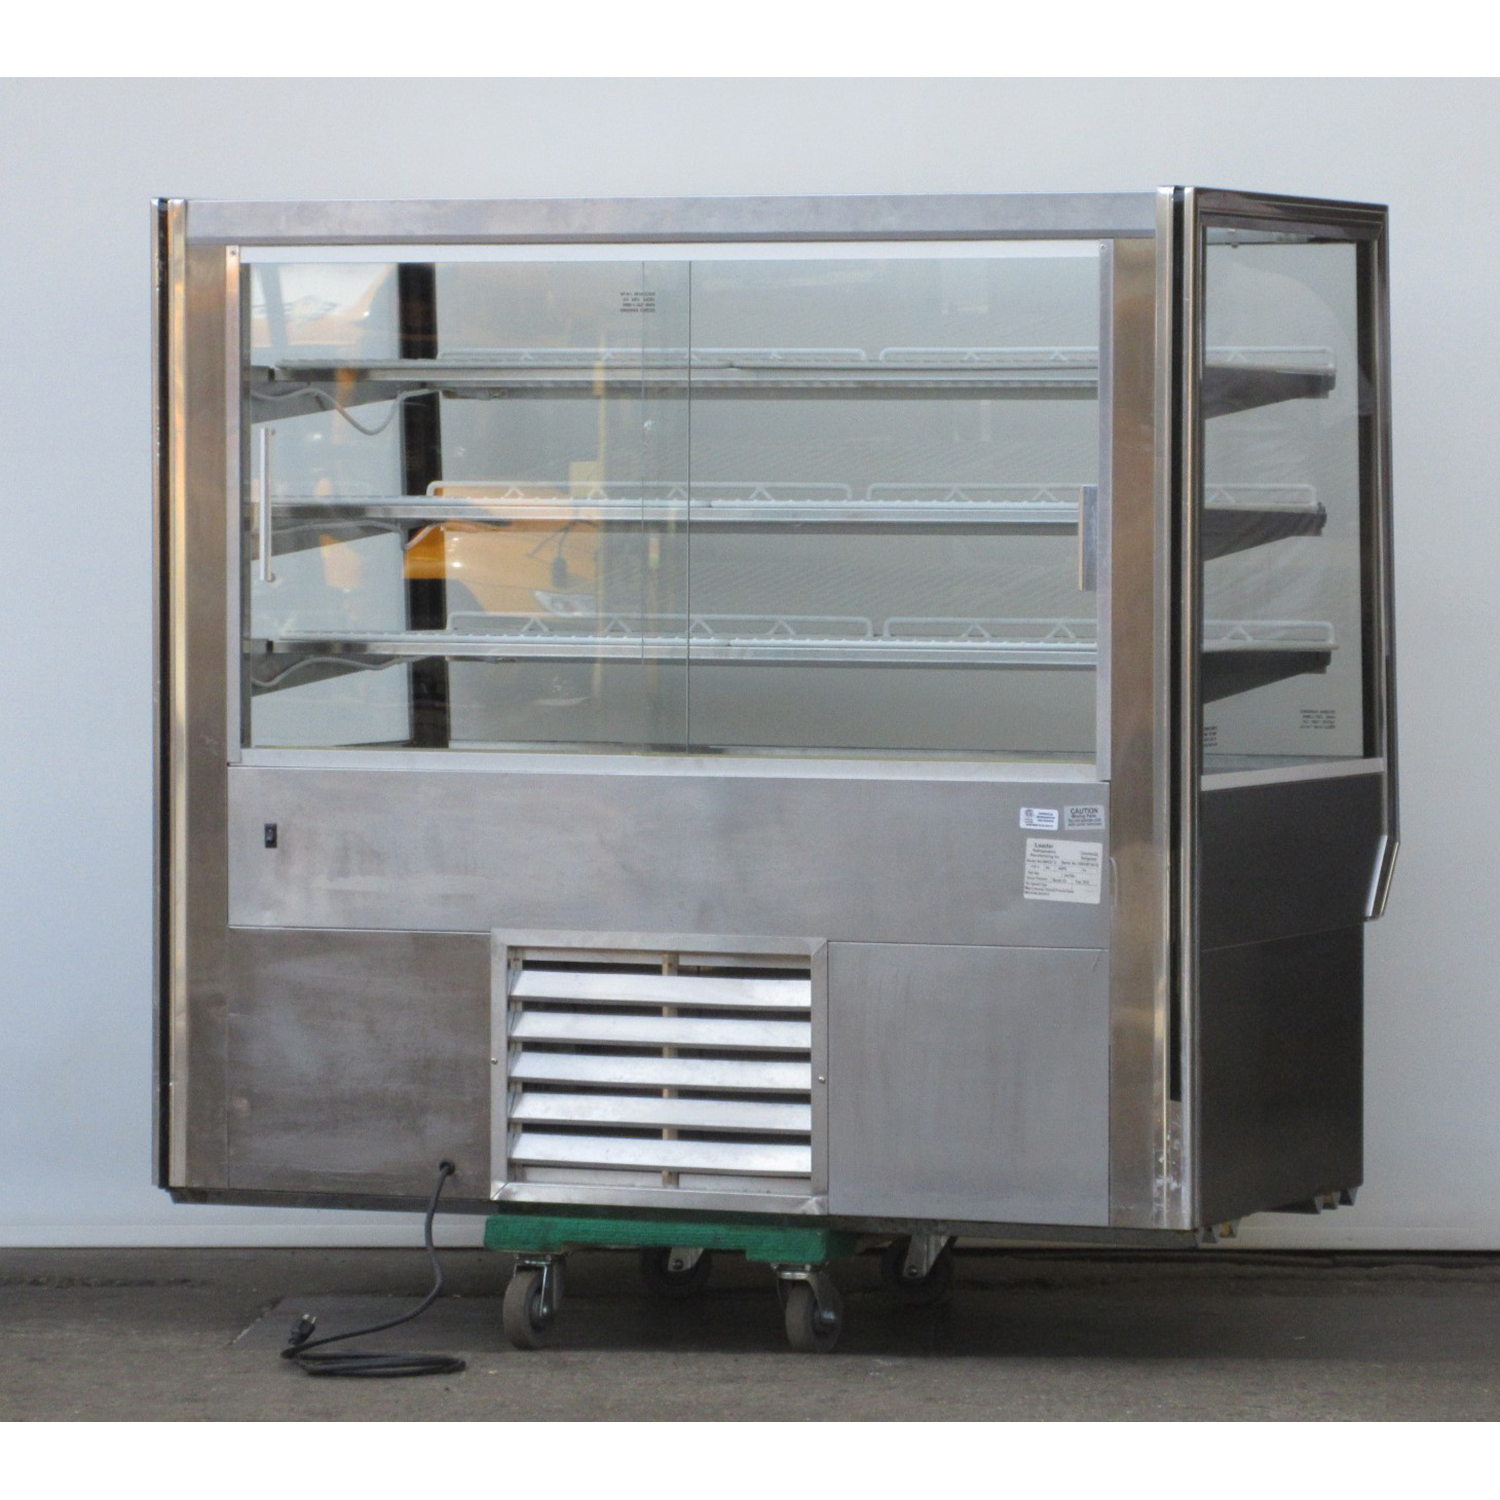 Leader HBK57D Dry Bakery Case, Used Excellent Condition image 2